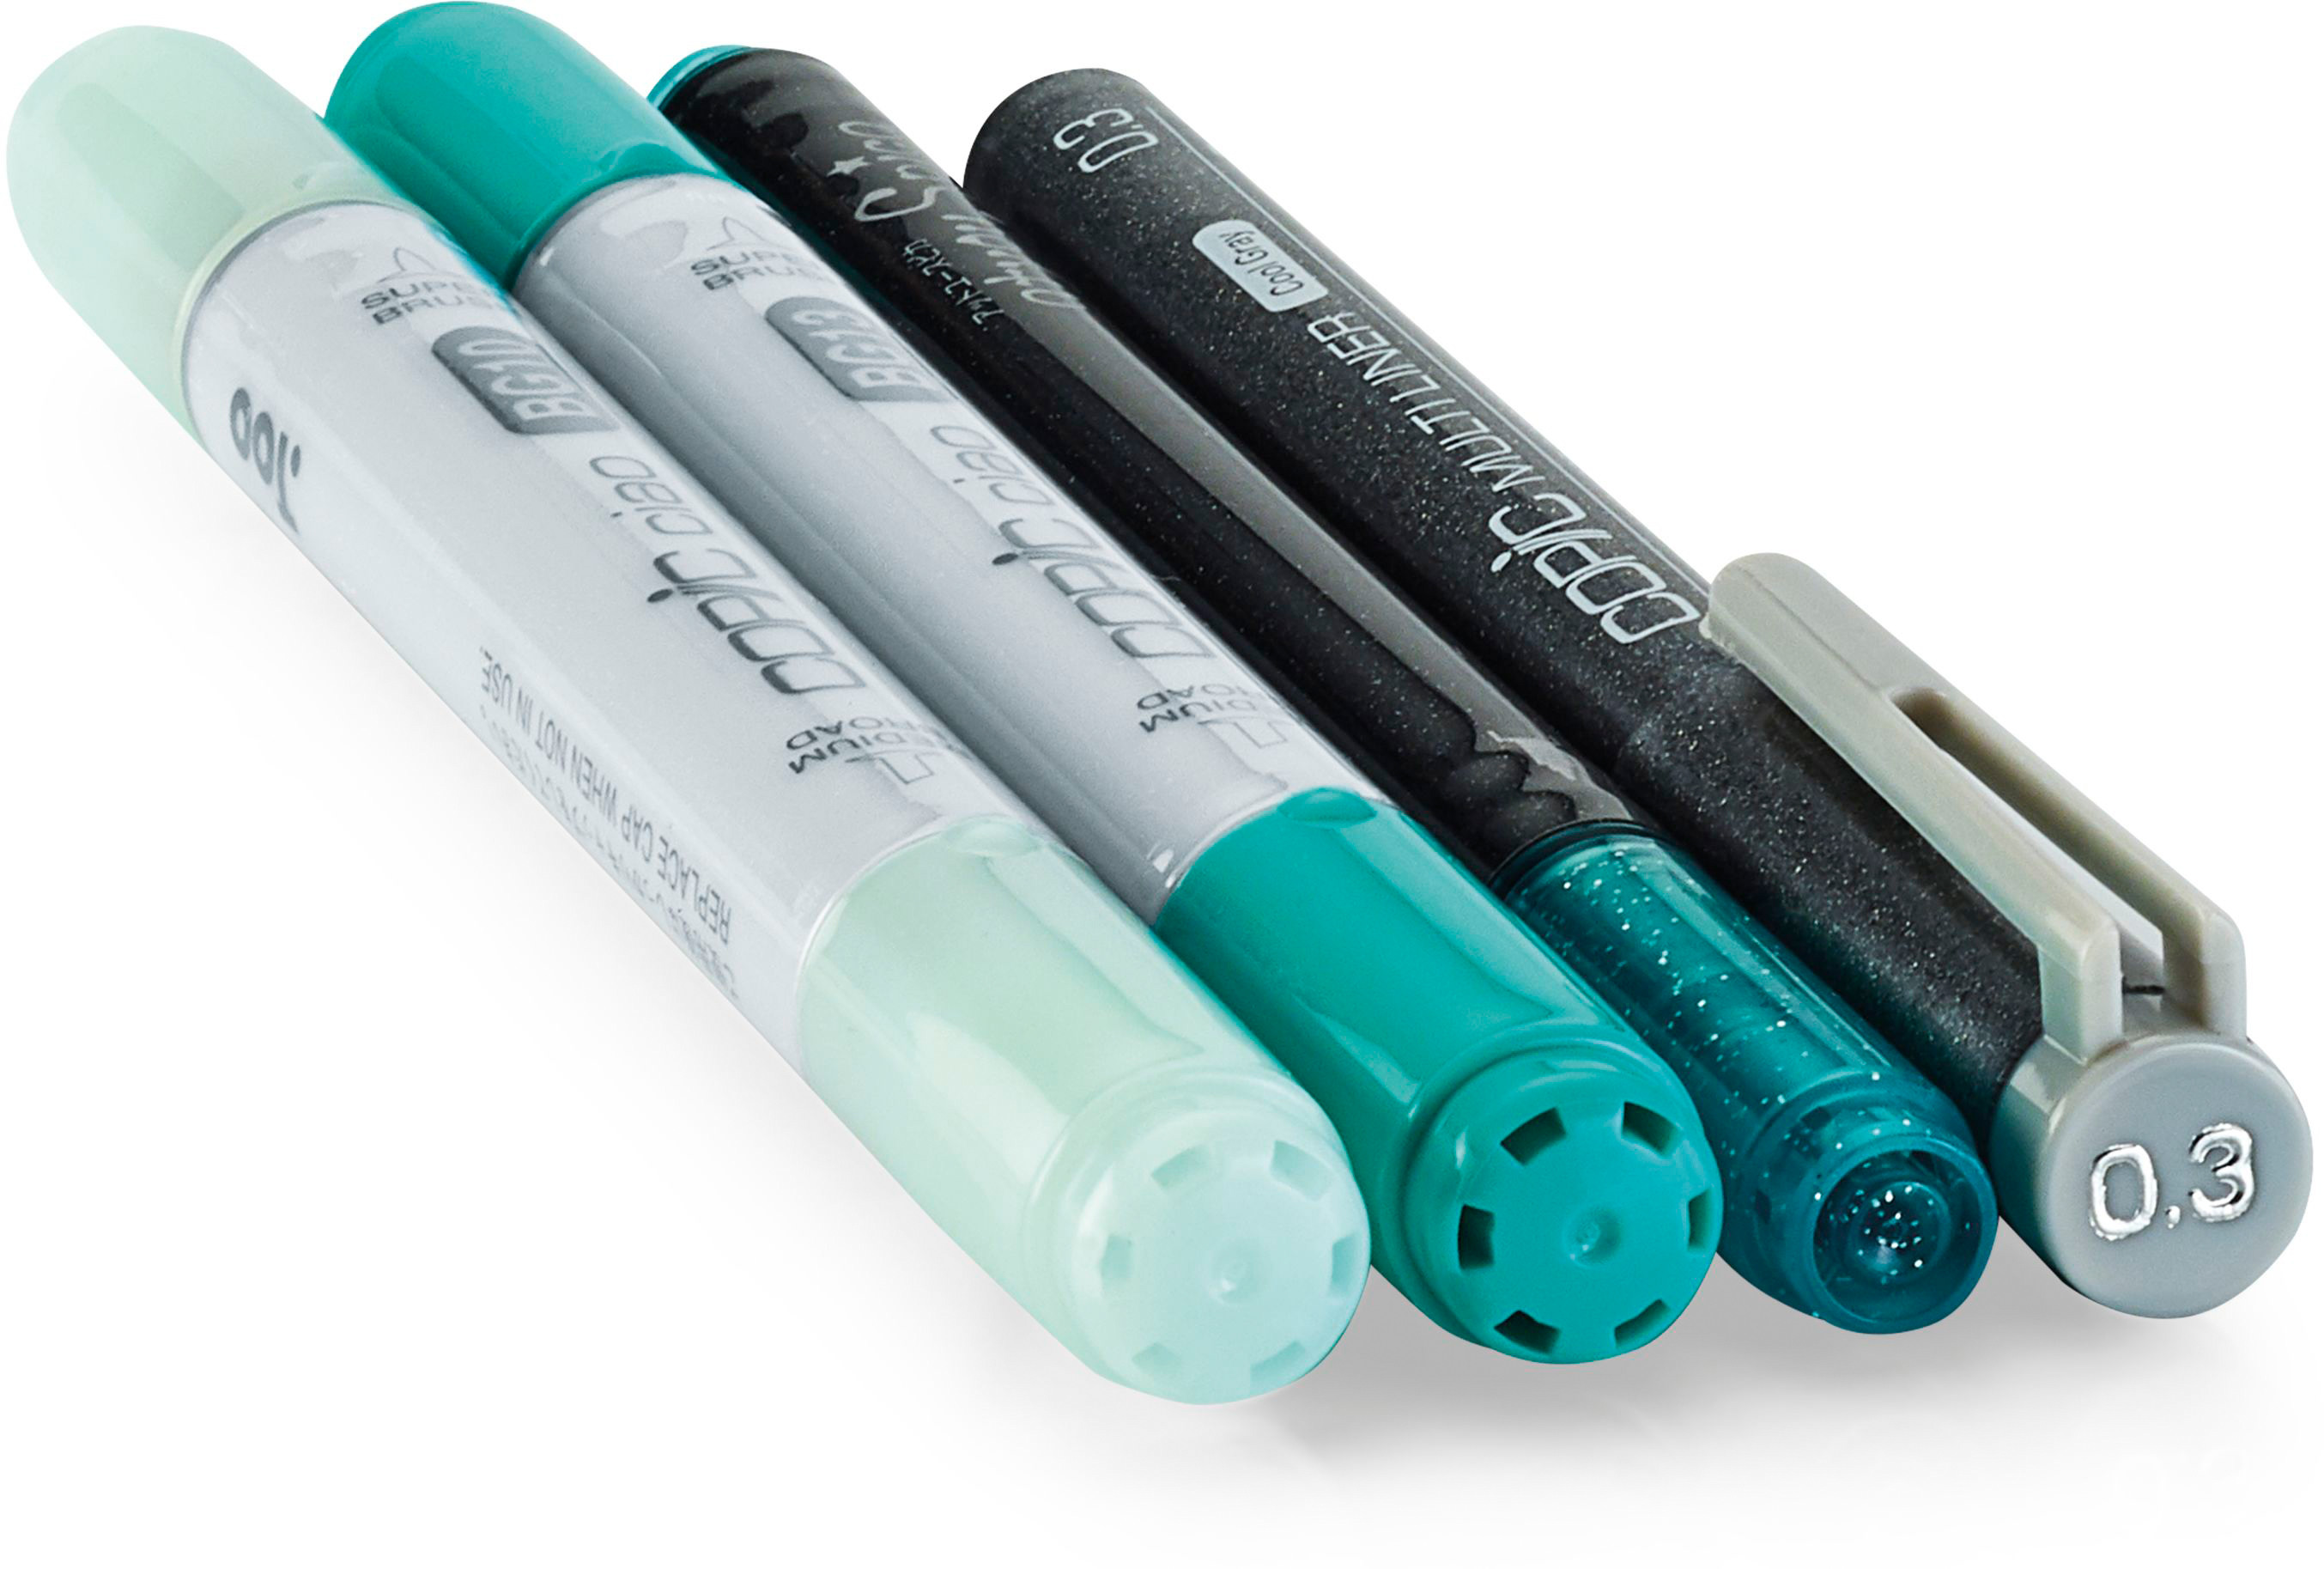 COPIC Marker Ciao 22075643 Doodle pack Turquoise,4 pcs.